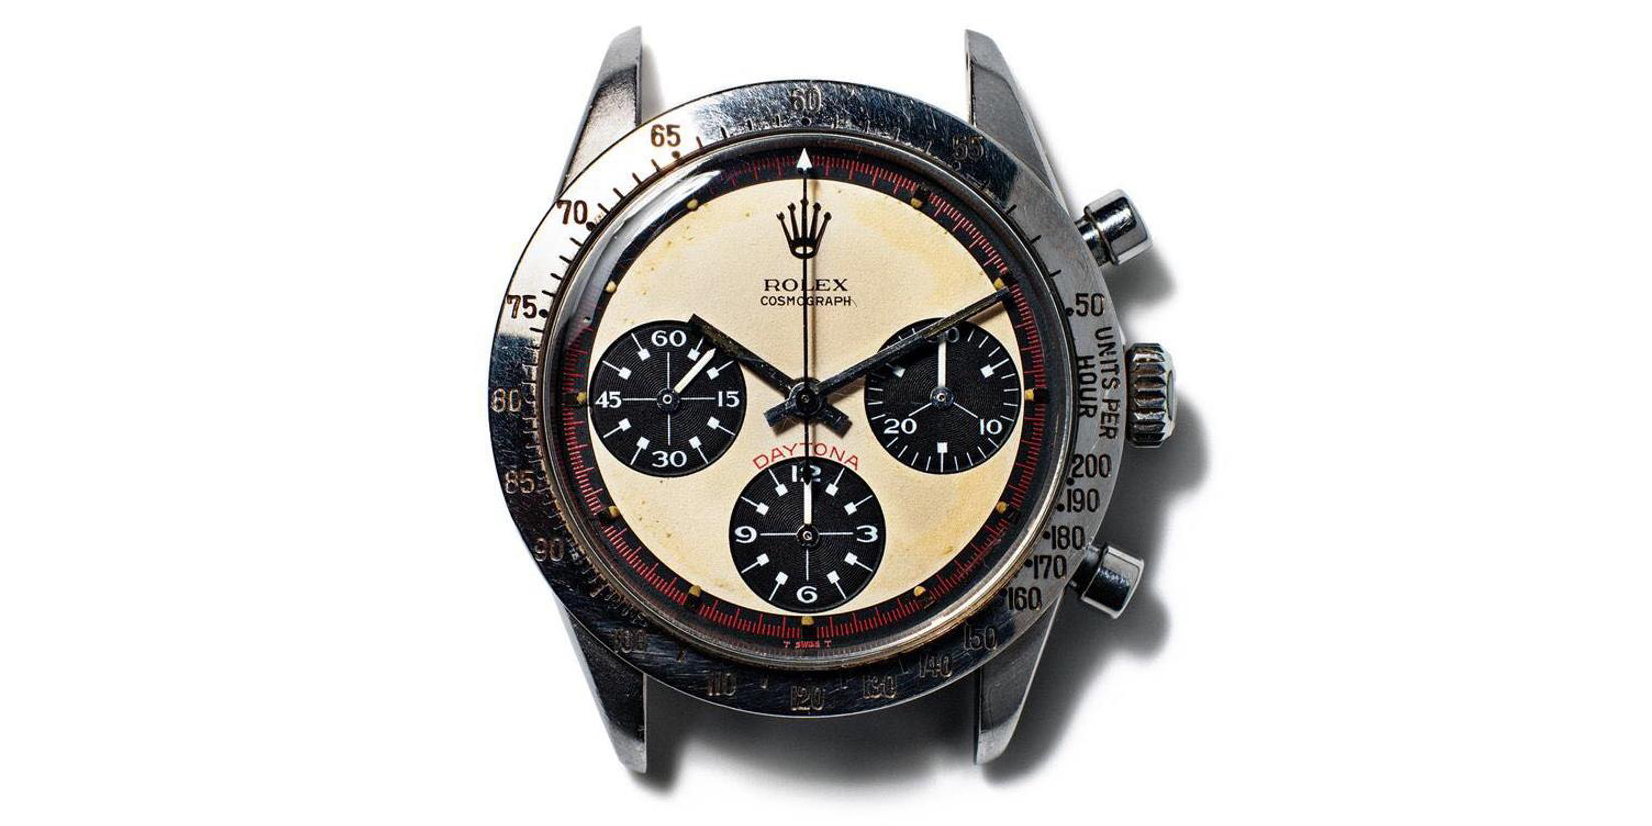 Paul Newman famously wore a Rolex Daytona Chronograph every day